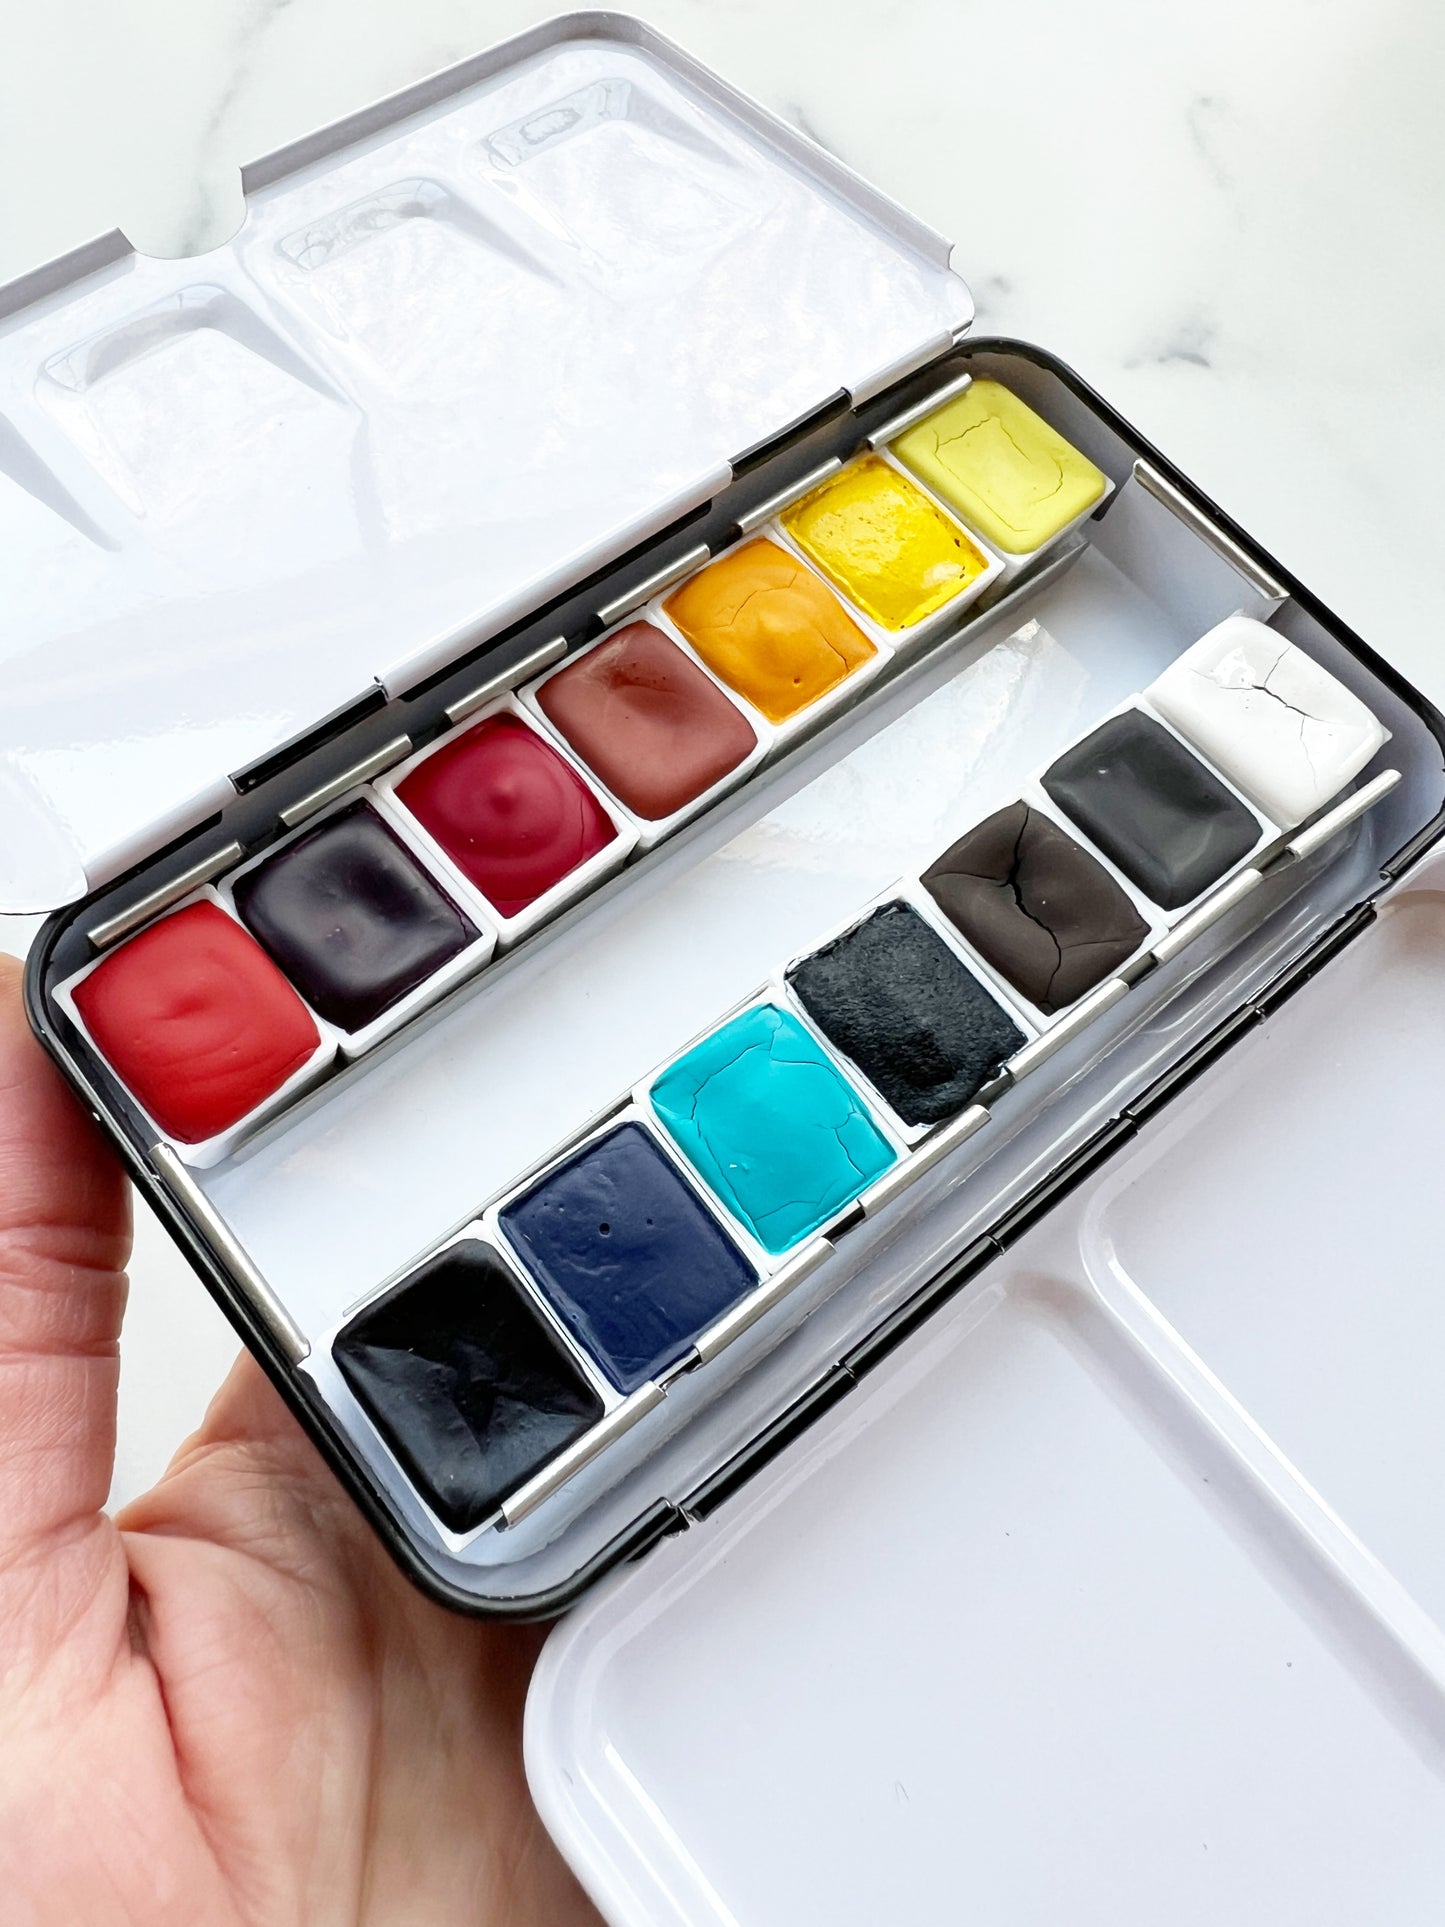 Primary 14 Paintbox, 14 half pans of watercolor paint in a black palette box